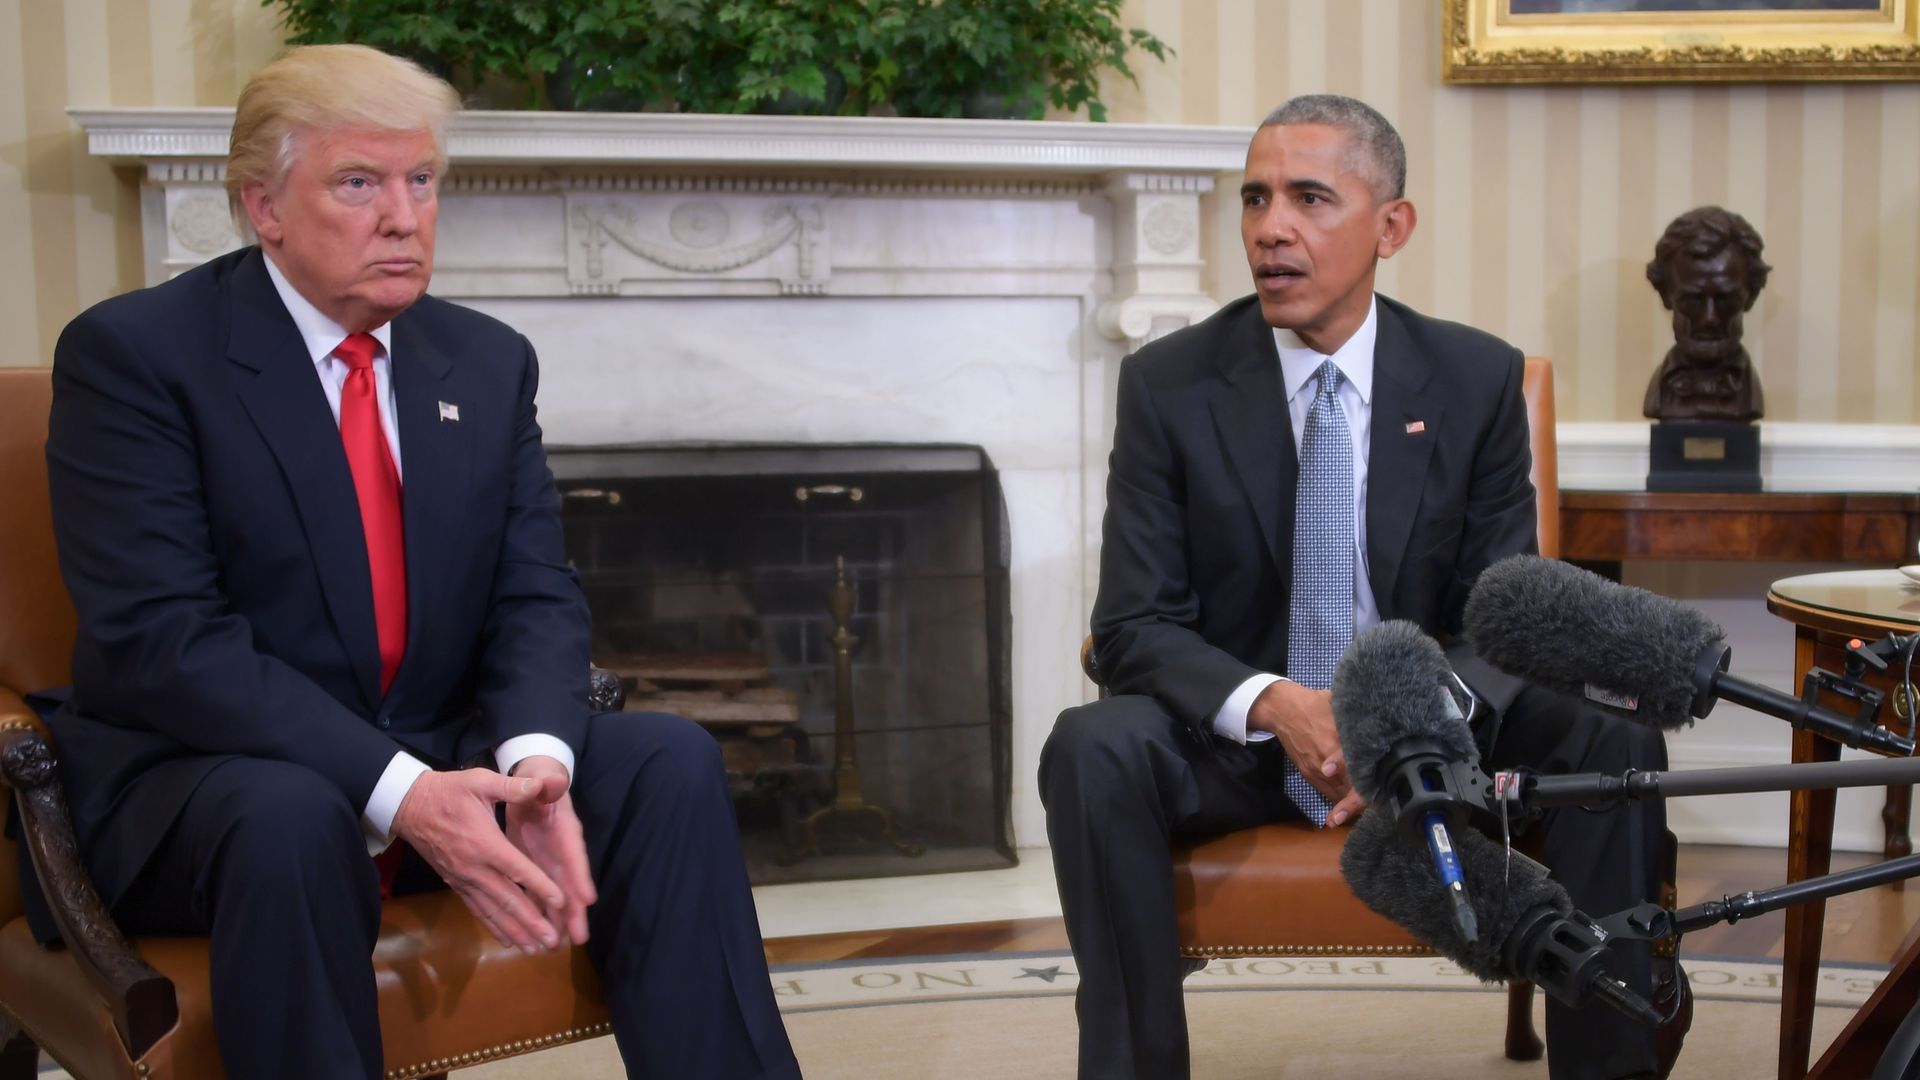 President Barack Obama meets with President-elect Donald Trump to update him on transition planning.